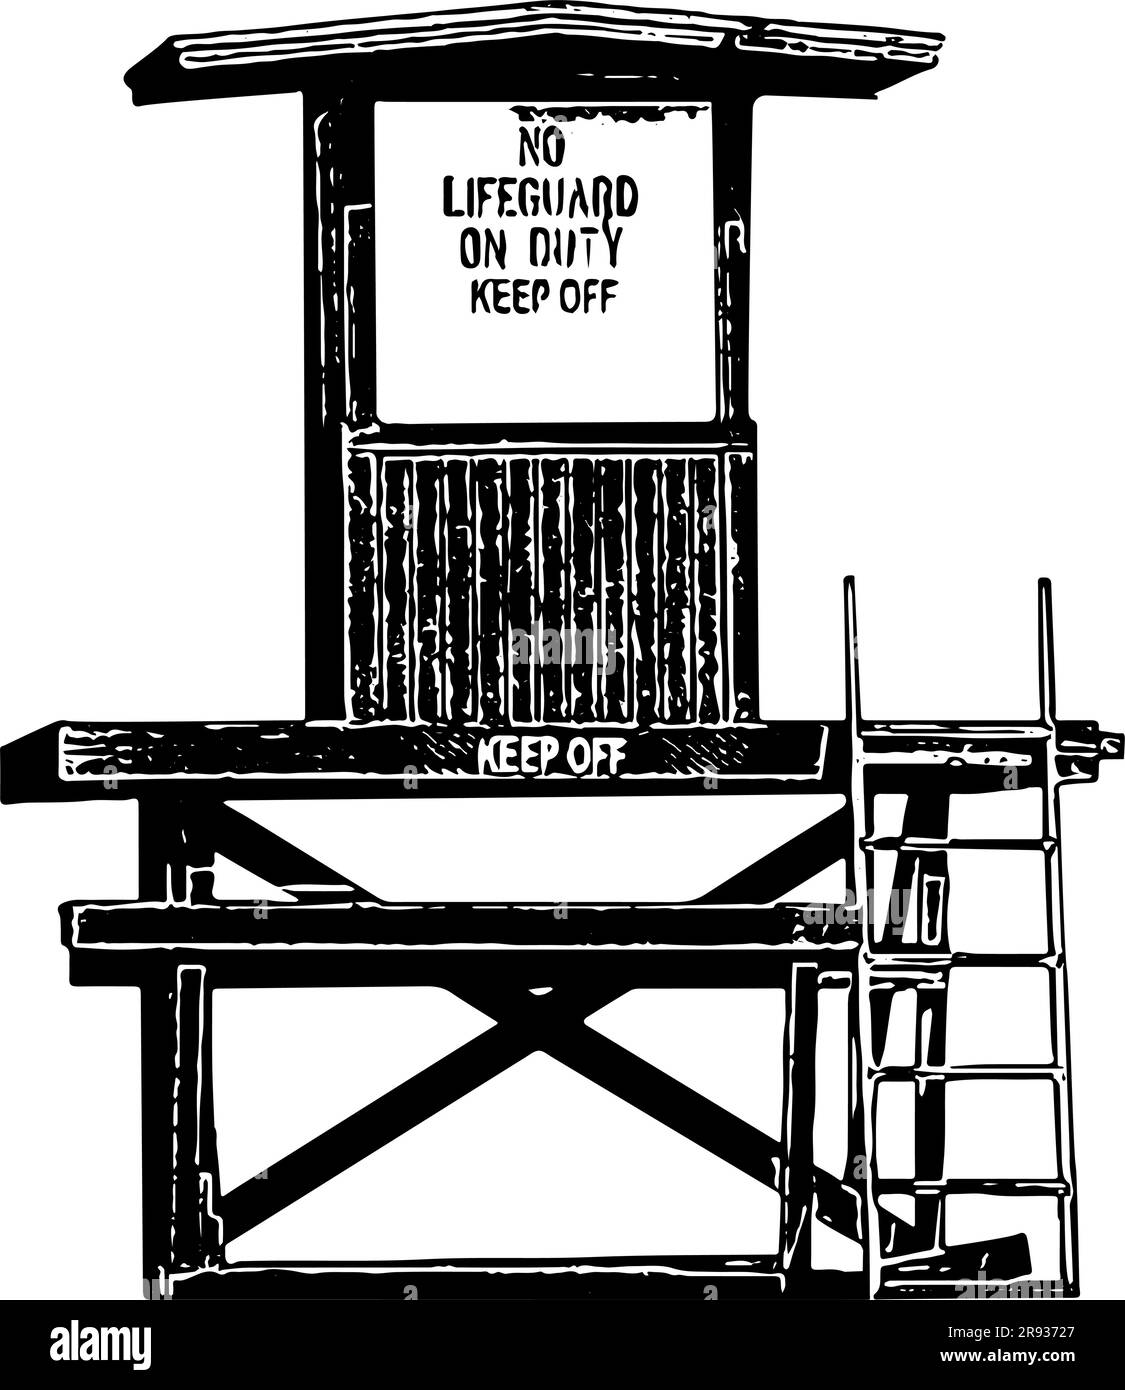 Lifeguard station with No lifeguard on duty, keep off sign illustration in black, isolated Stock Vector